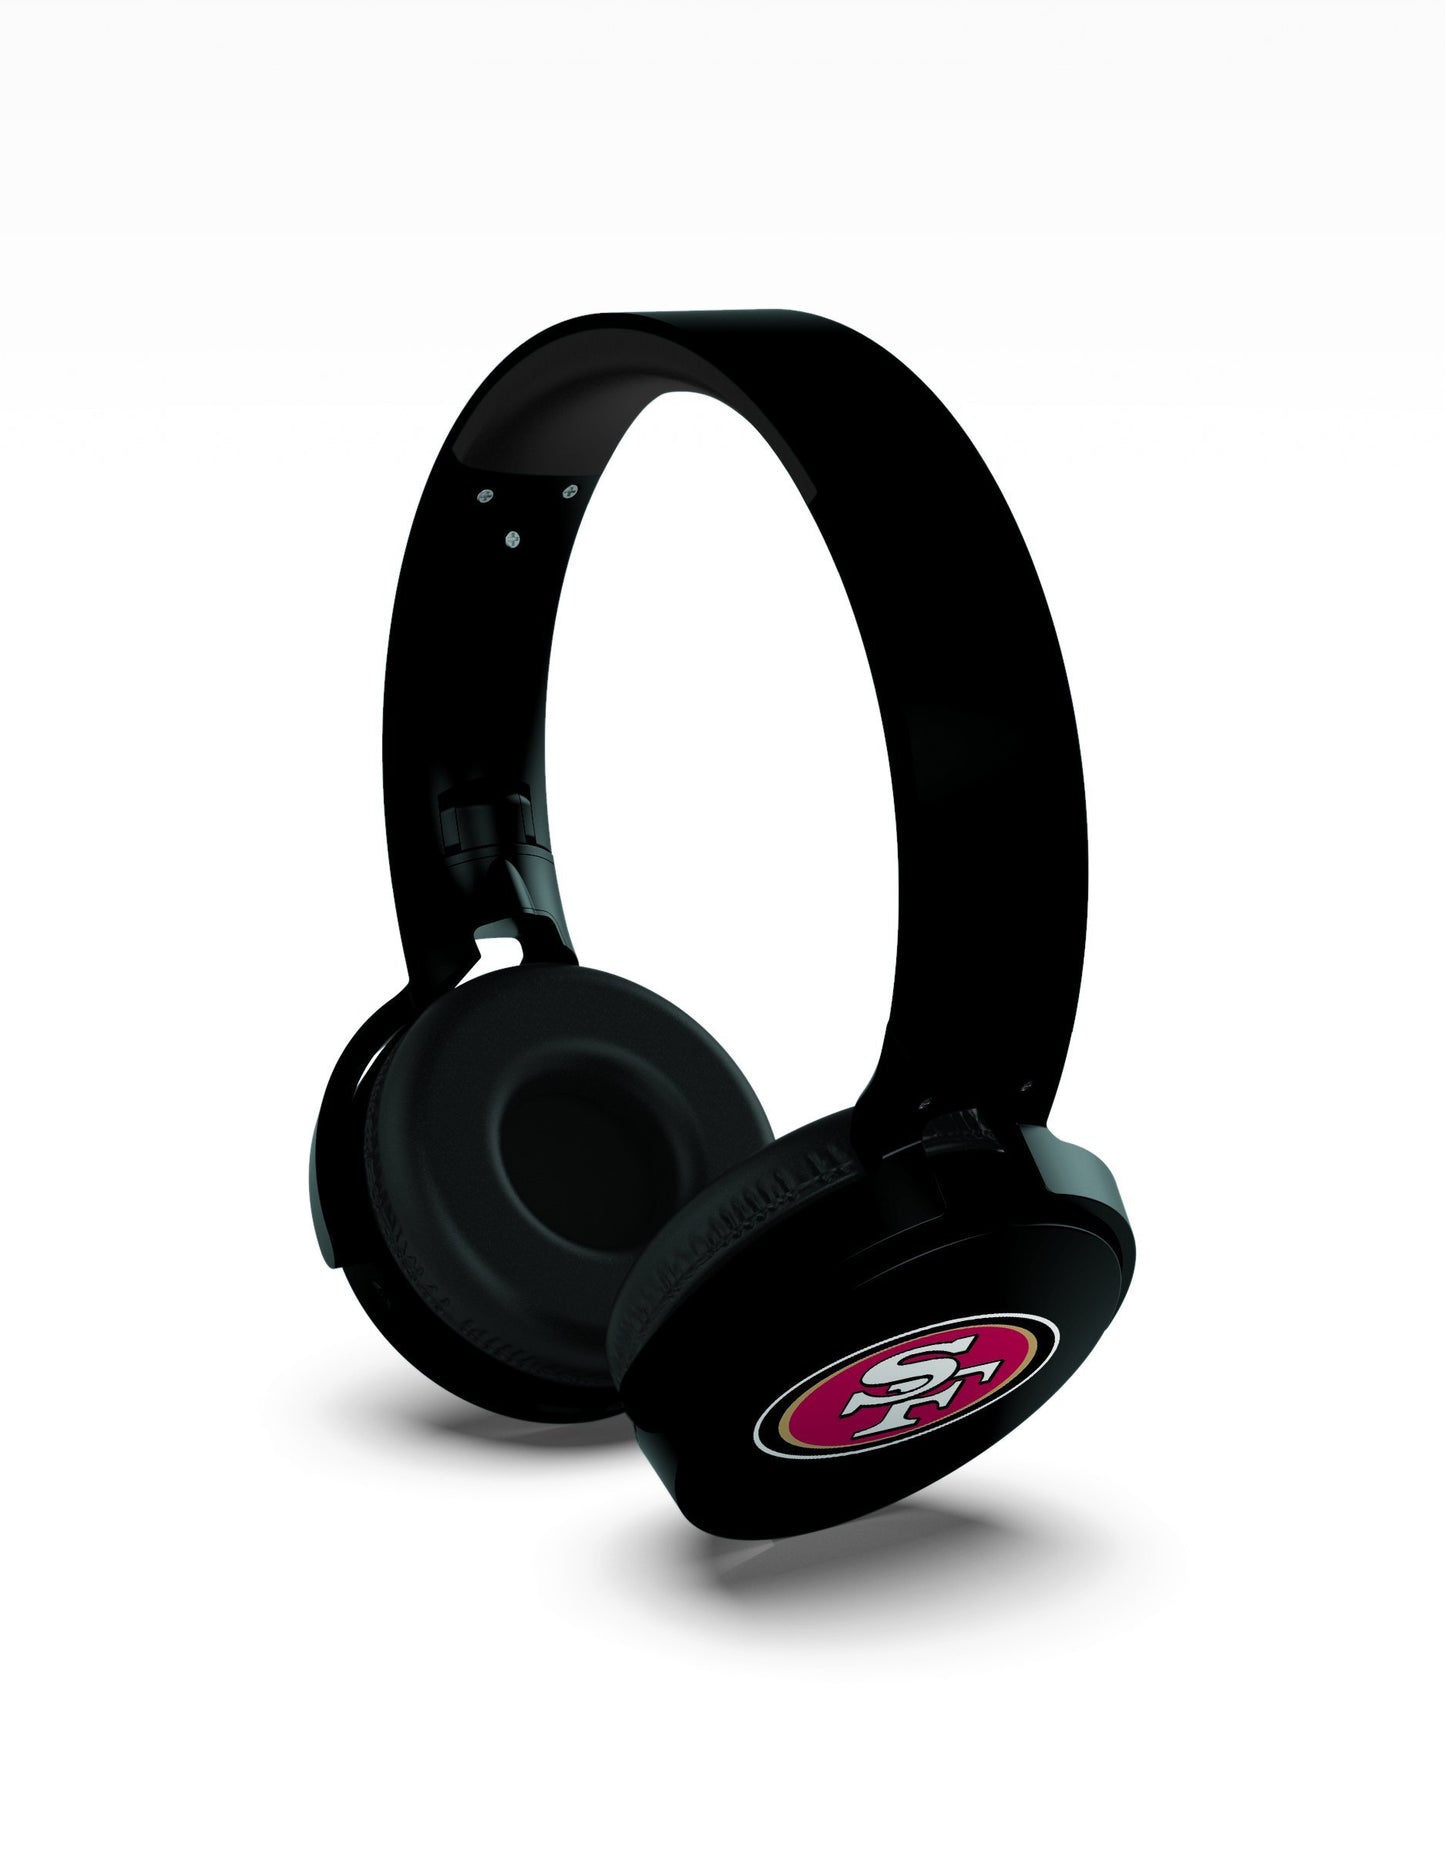 San Francisco 49ers Wireless Bluetooth Headphones by Prrime Brands Group